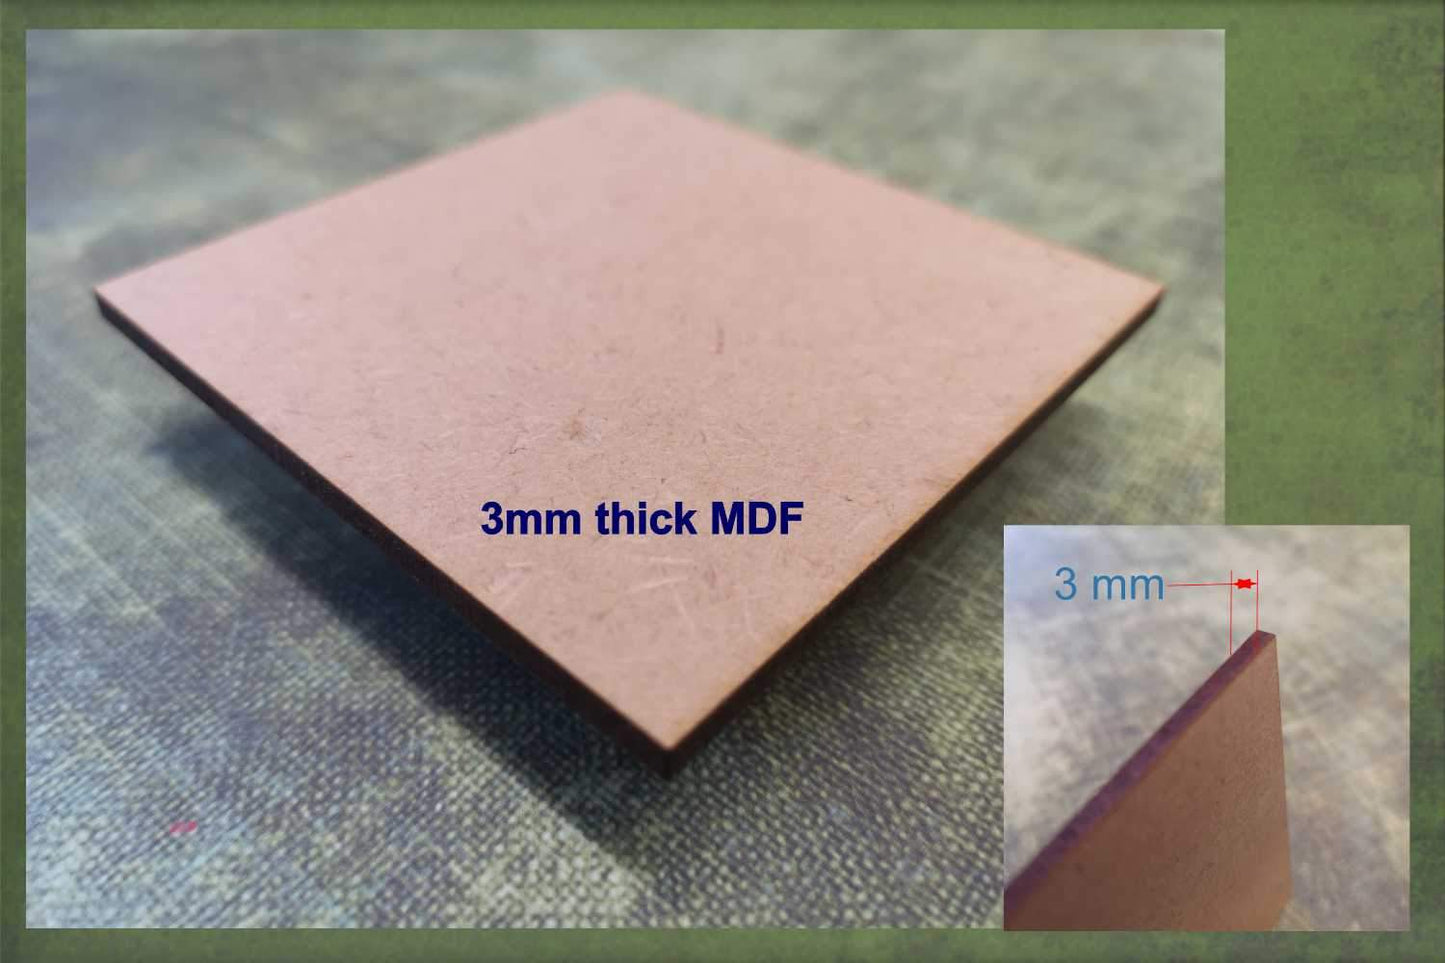 3mm thick MDF used to make the Hawk jet plane cut-outs ready for crafting